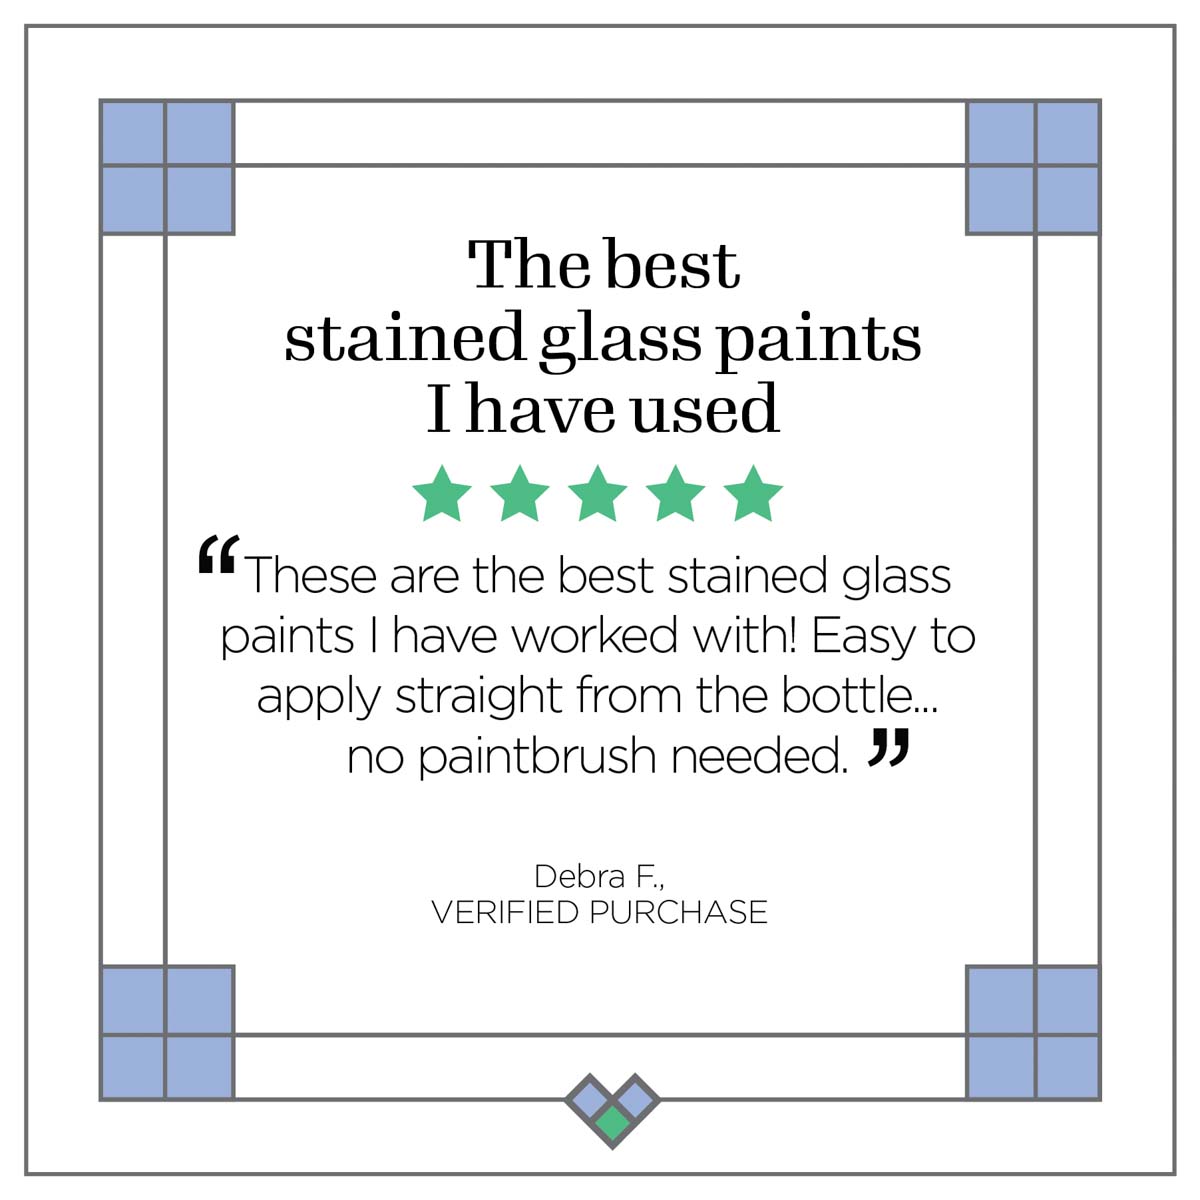 Gallery Glass ® Stained Glass Effect Paint - Peach, 2 oz. - 20031